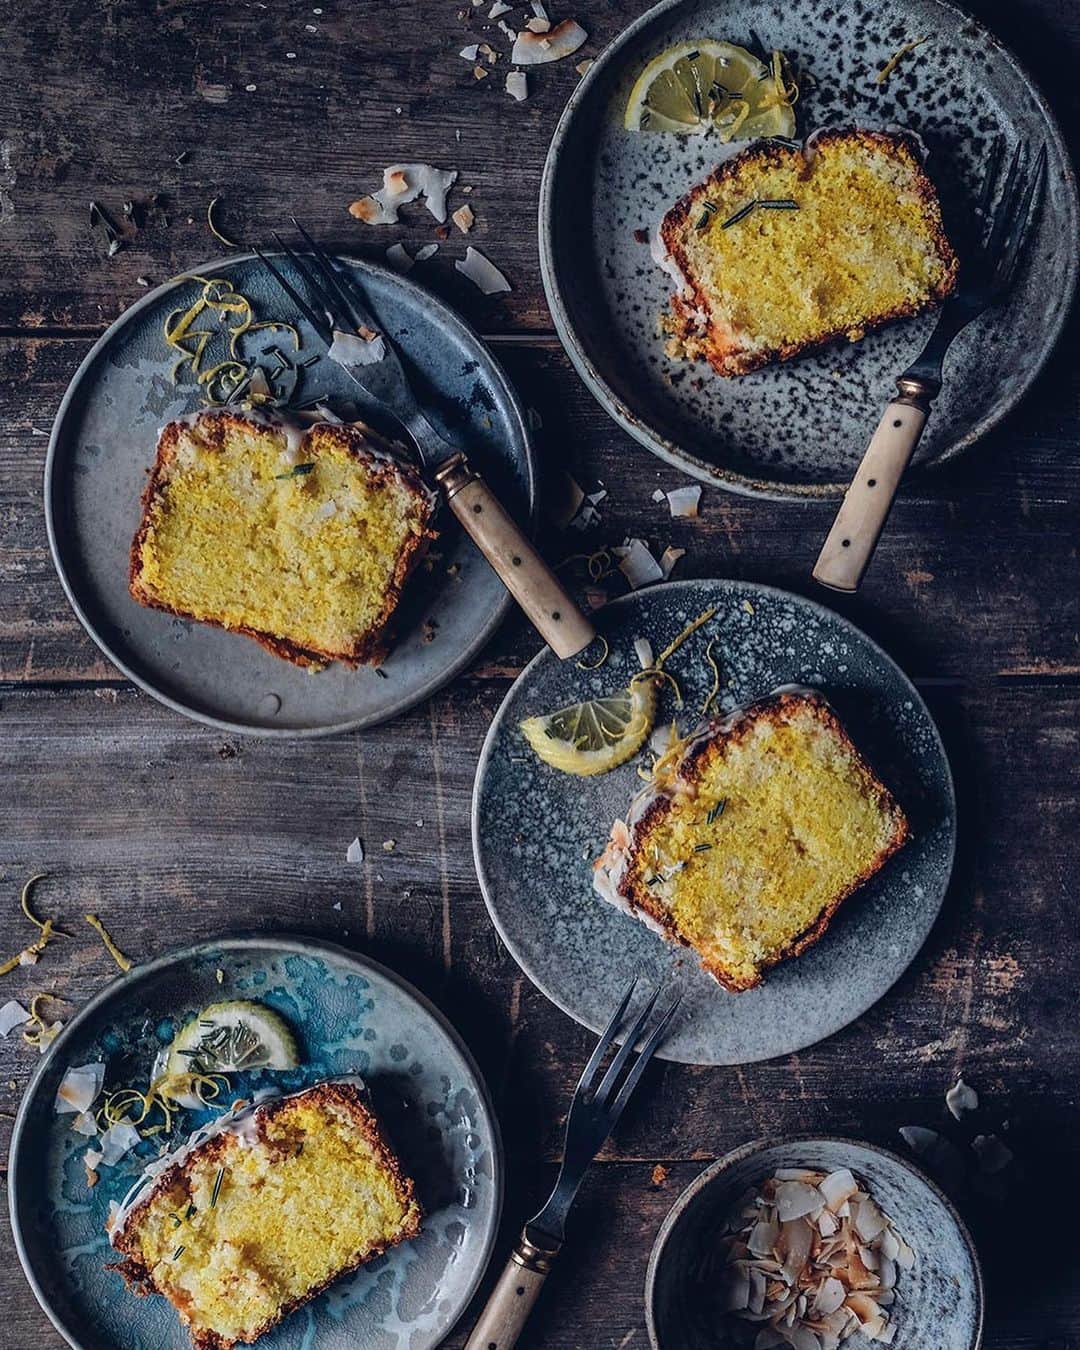 Our Food Storiesのインスタグラム：「Get the recipe for this simple and delicious gluten-free lemon cake on the blog, link is in profile 🍋😋 #ourfoodstories ____ #cakelover #cakelove #bakinglove #lemoncake #zitronenkuchen #glutenfreecake #glutenfri #glutenfrei #glutenfreerecipes #foodstyling #foodstylist #foodphotographer #germanfoodblogger #onthetable #ceramicart」